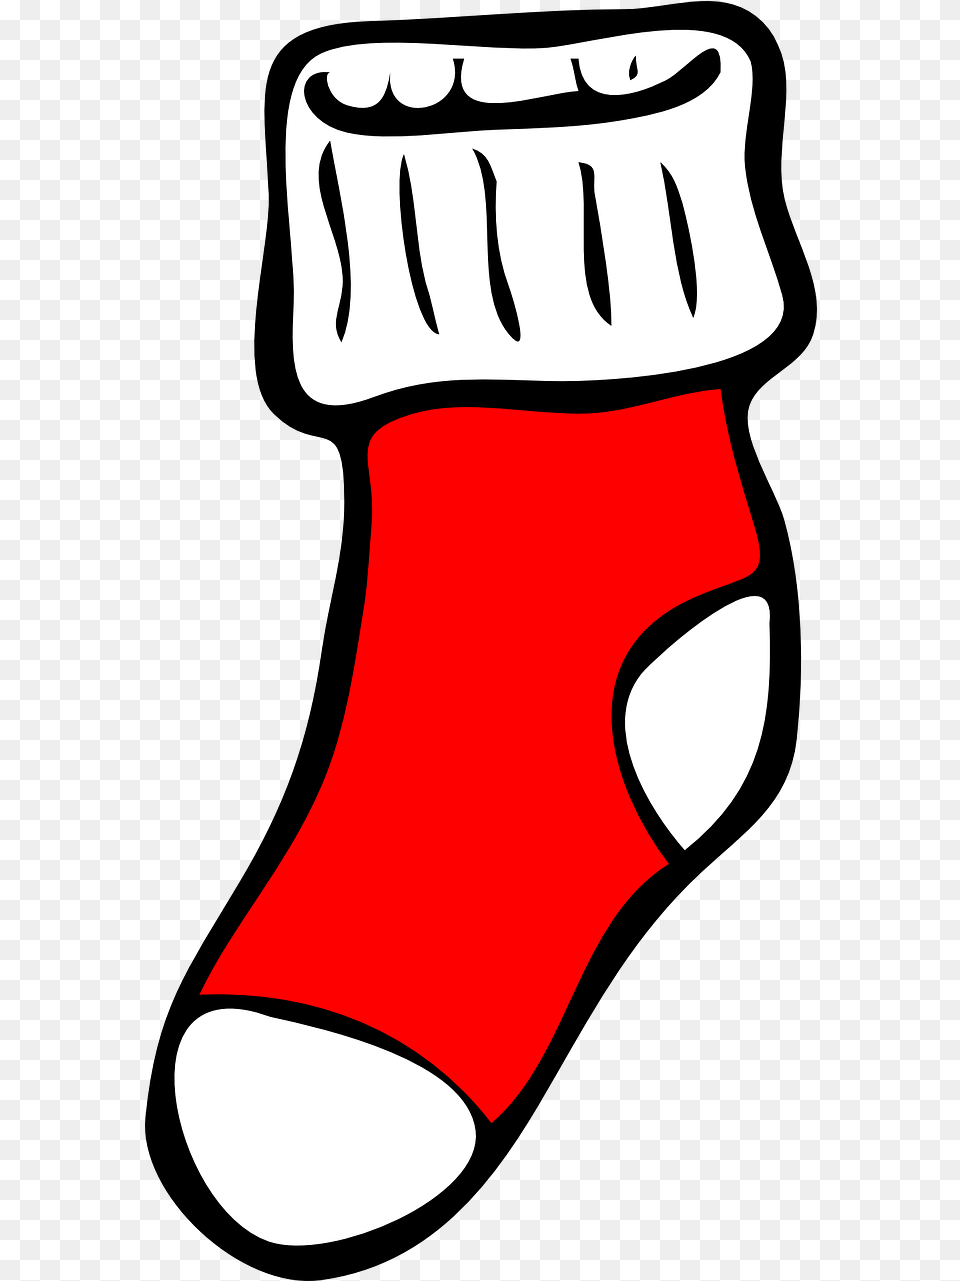 Stocking Christmas Sock Vector Graphic On Pixabay Sock Clipart, Clothing, Hosiery, Christmas Decorations, Festival Free Png Download